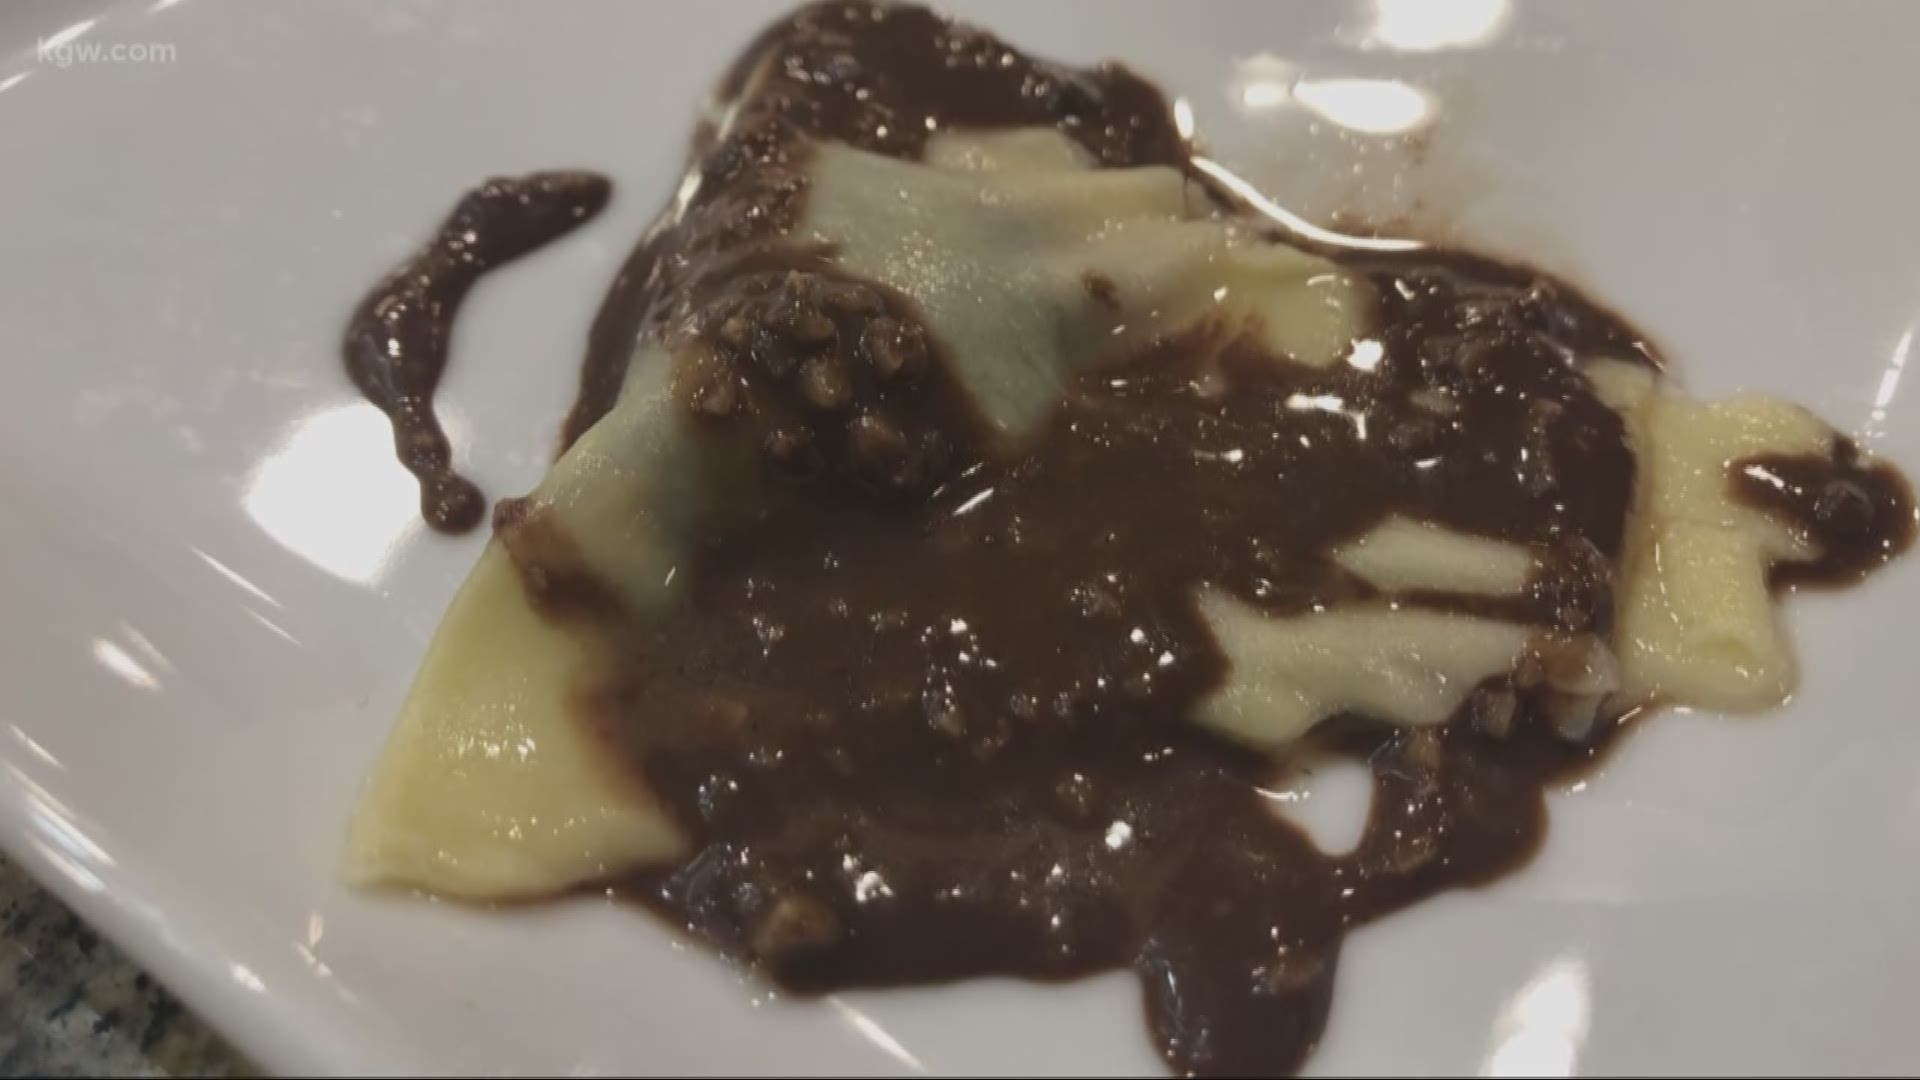 Chef Jacob Valentine from Feed the Mass joins us in studio to make his unique spin on ravioli.... with chocolate! 
feedthemass.com
#TonightwithCassidy